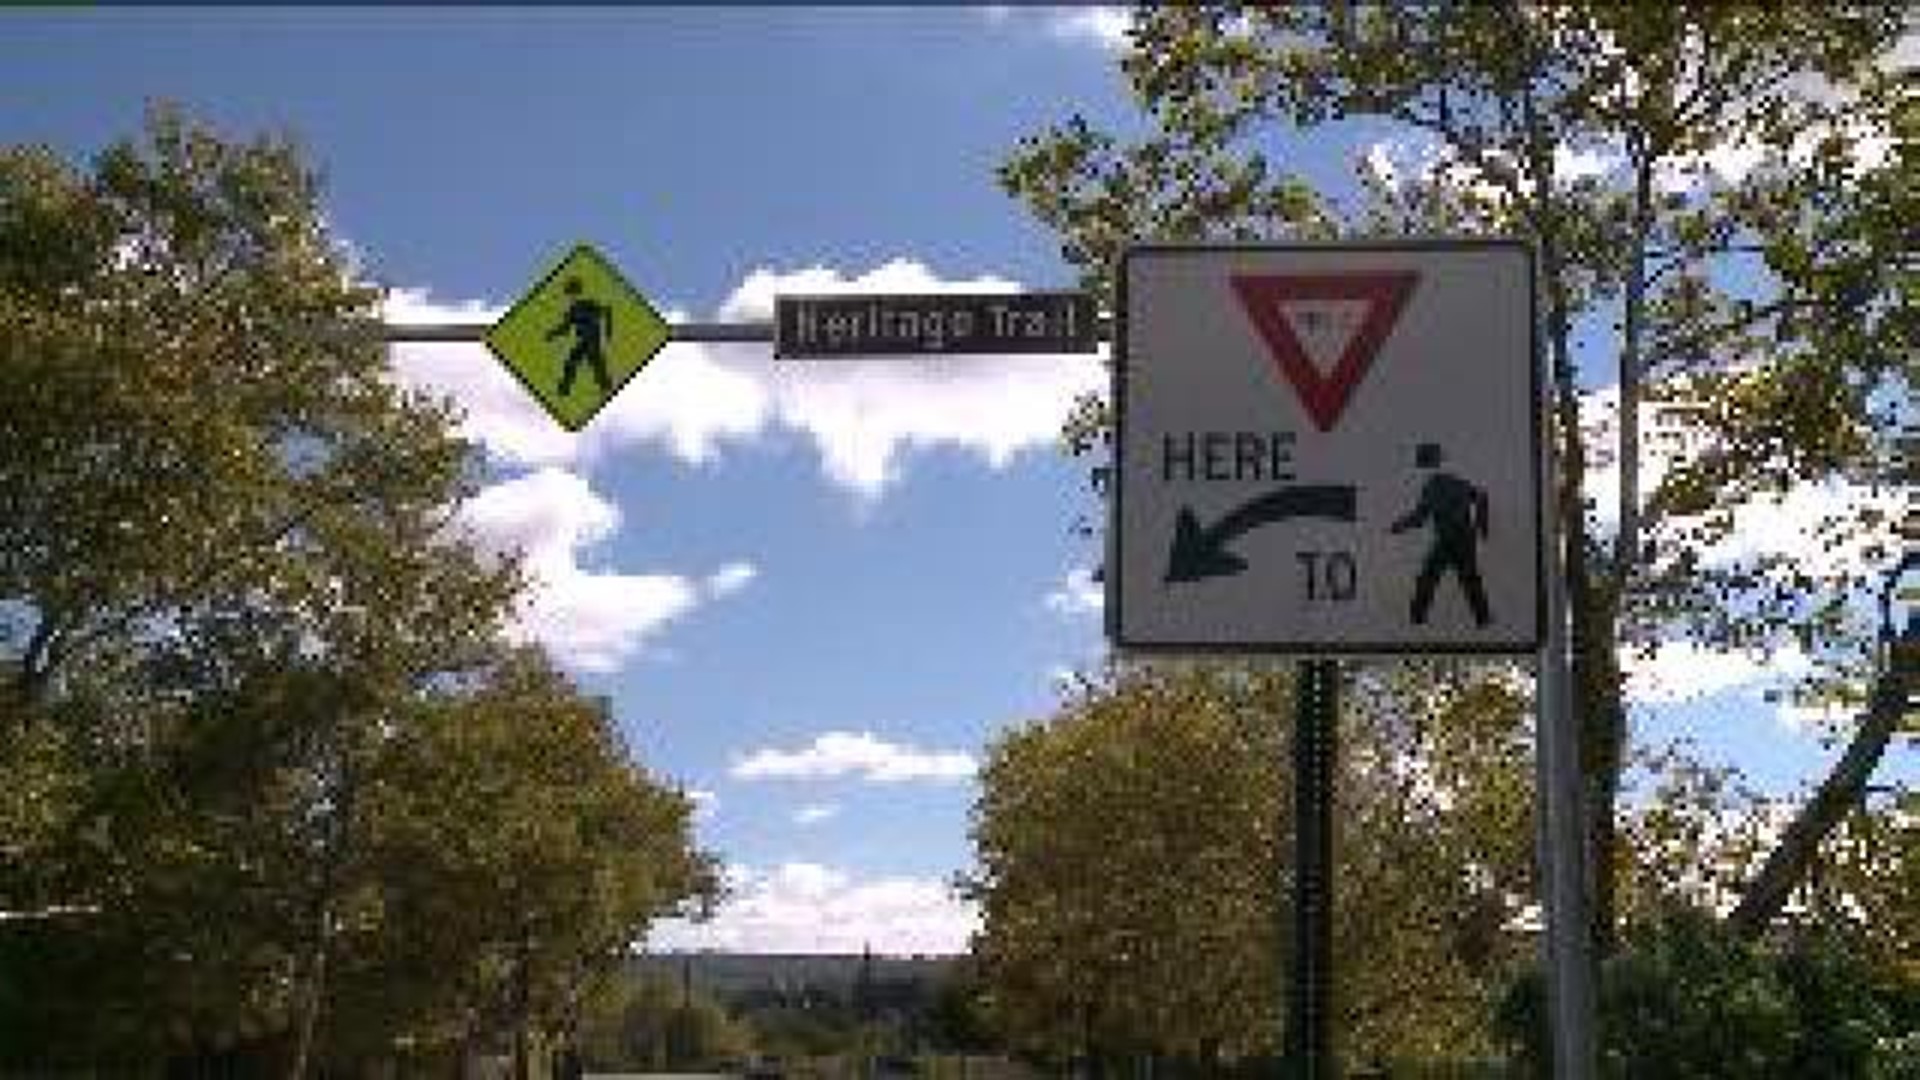 New Rules For Drivers Near Heritage Trail